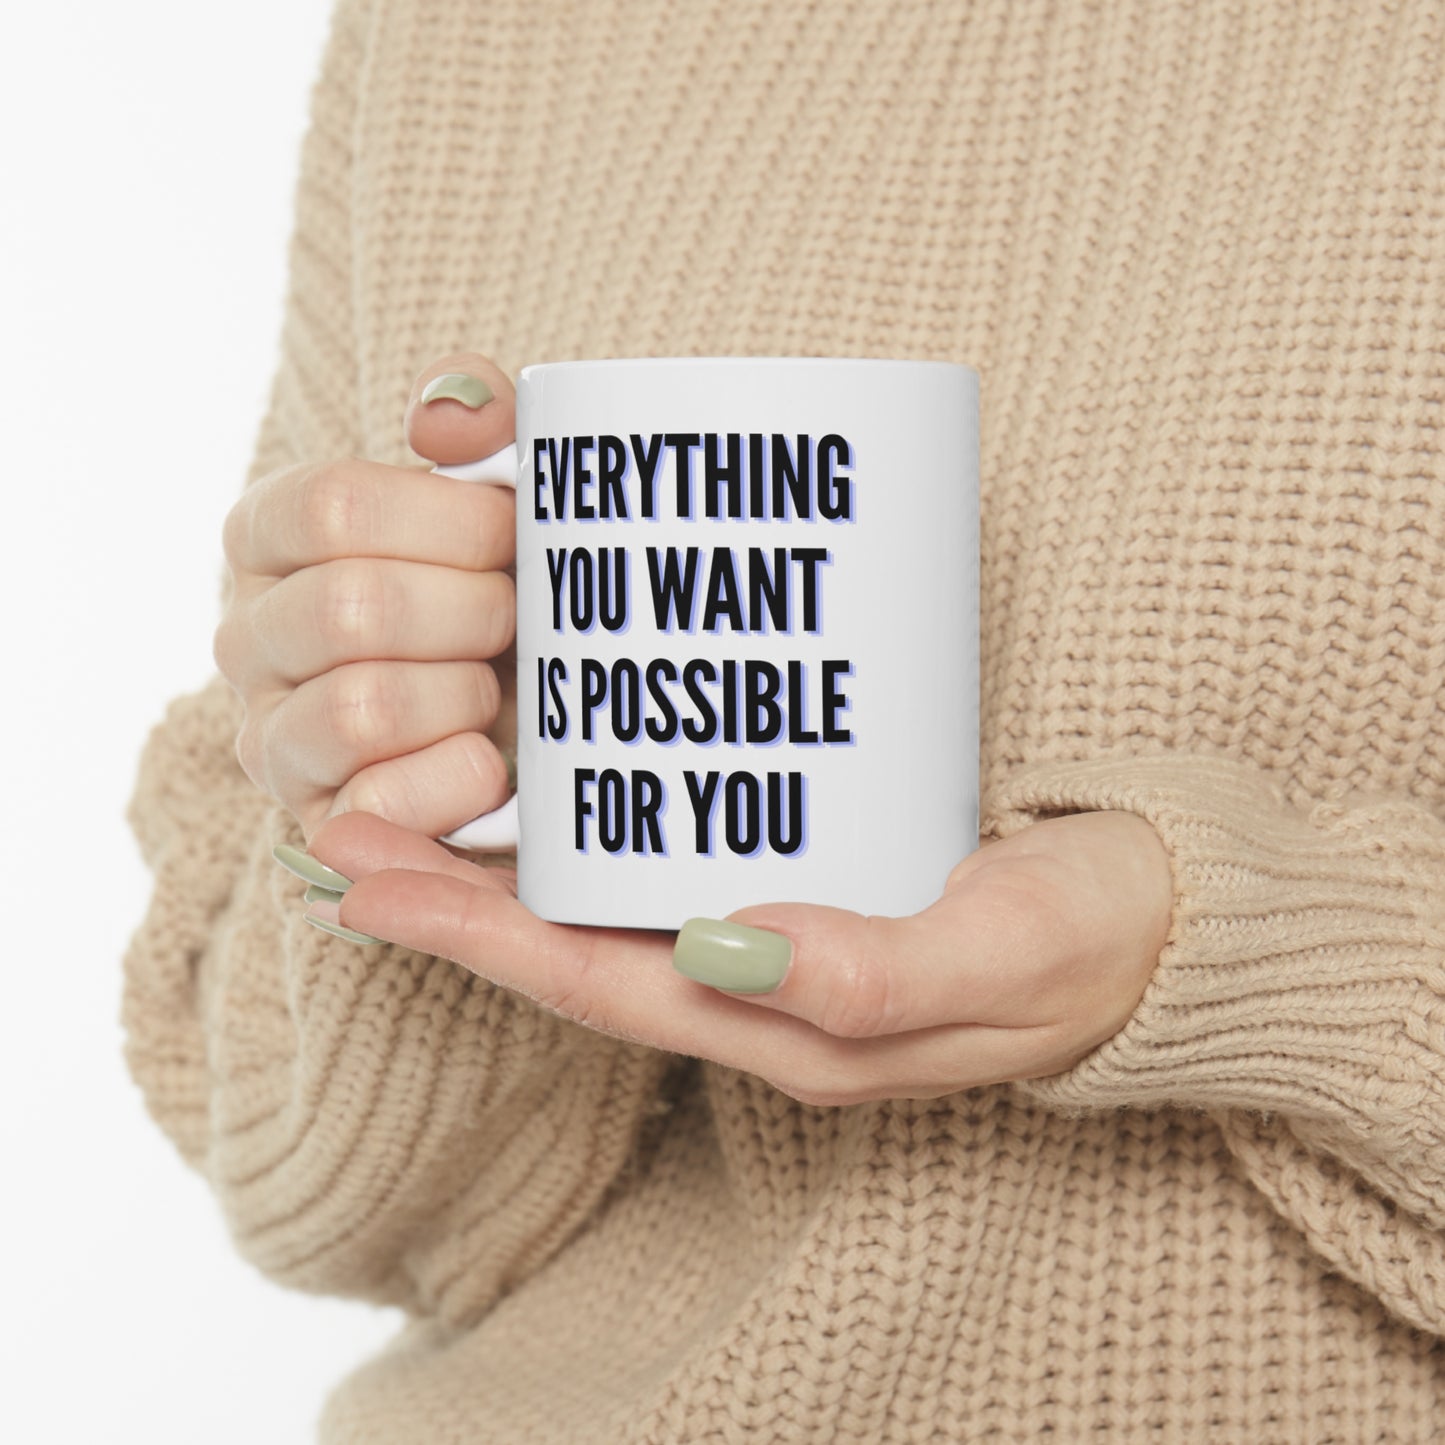 Everything You Want Is Possible For You Ceramic Mug 11oz